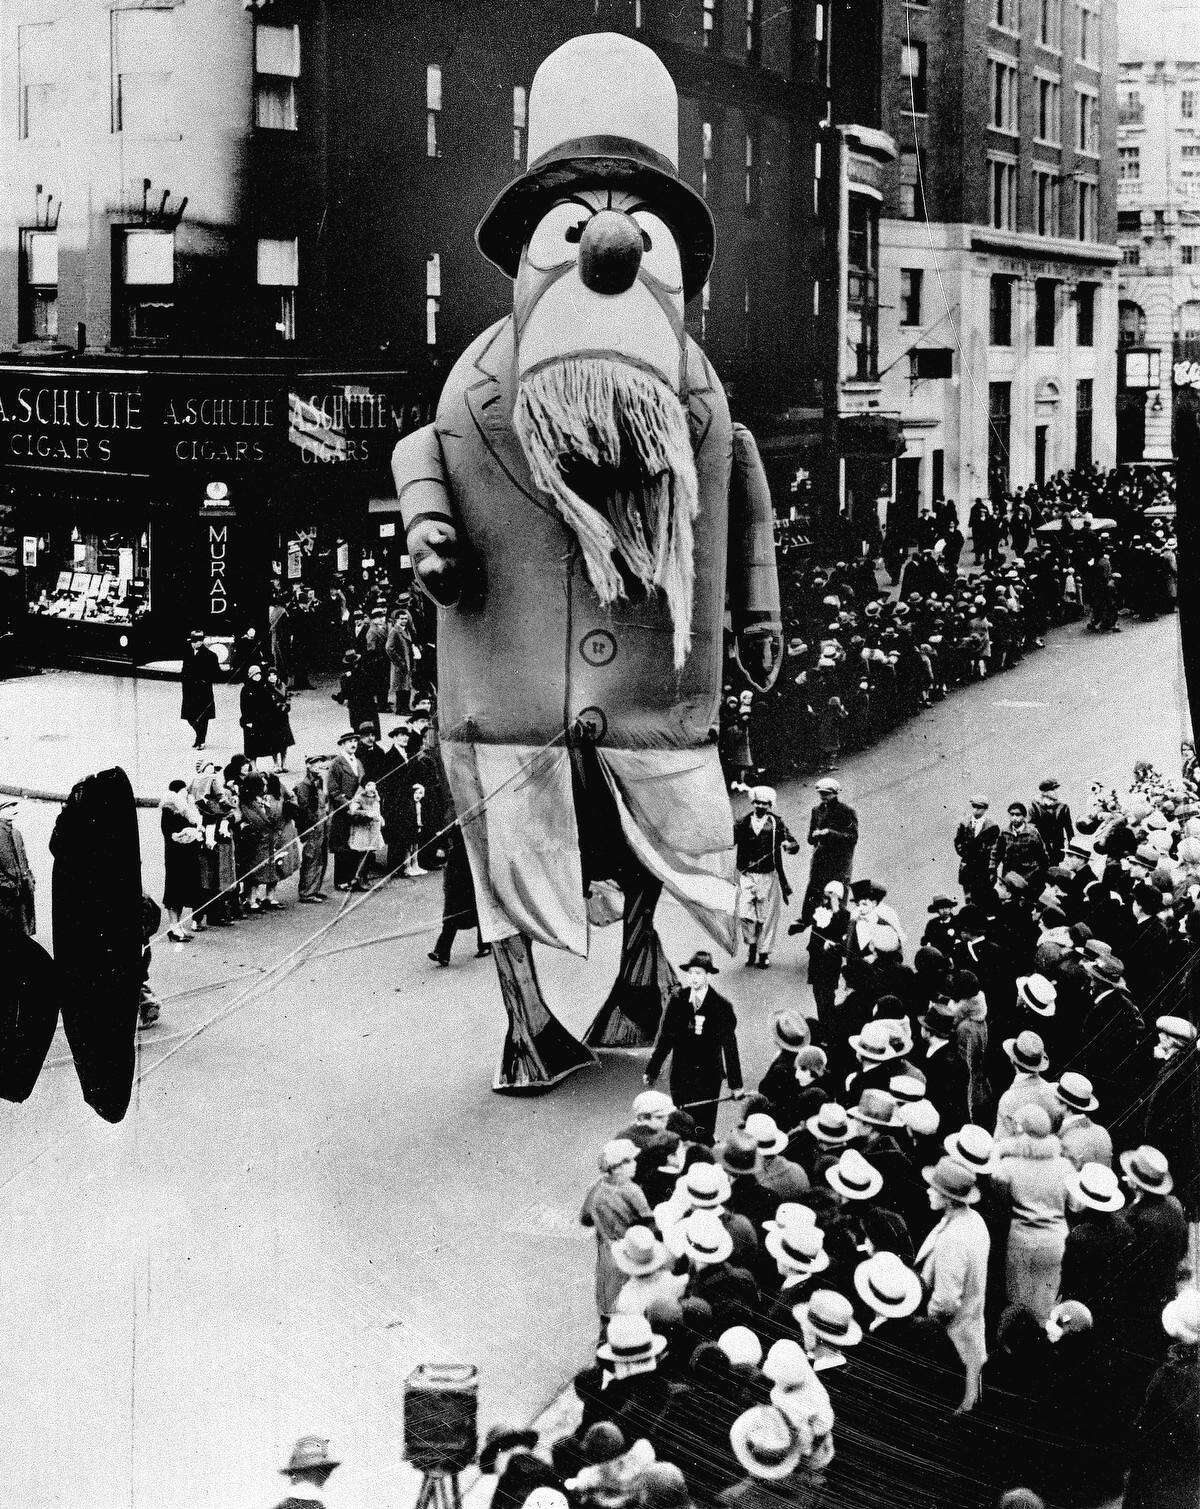 A large outdoor float of Captain Nemo makes its way down the street during the Macy's Thanksgiving Day parade in New York City on Nov. 28, 1929. (AP Photo)